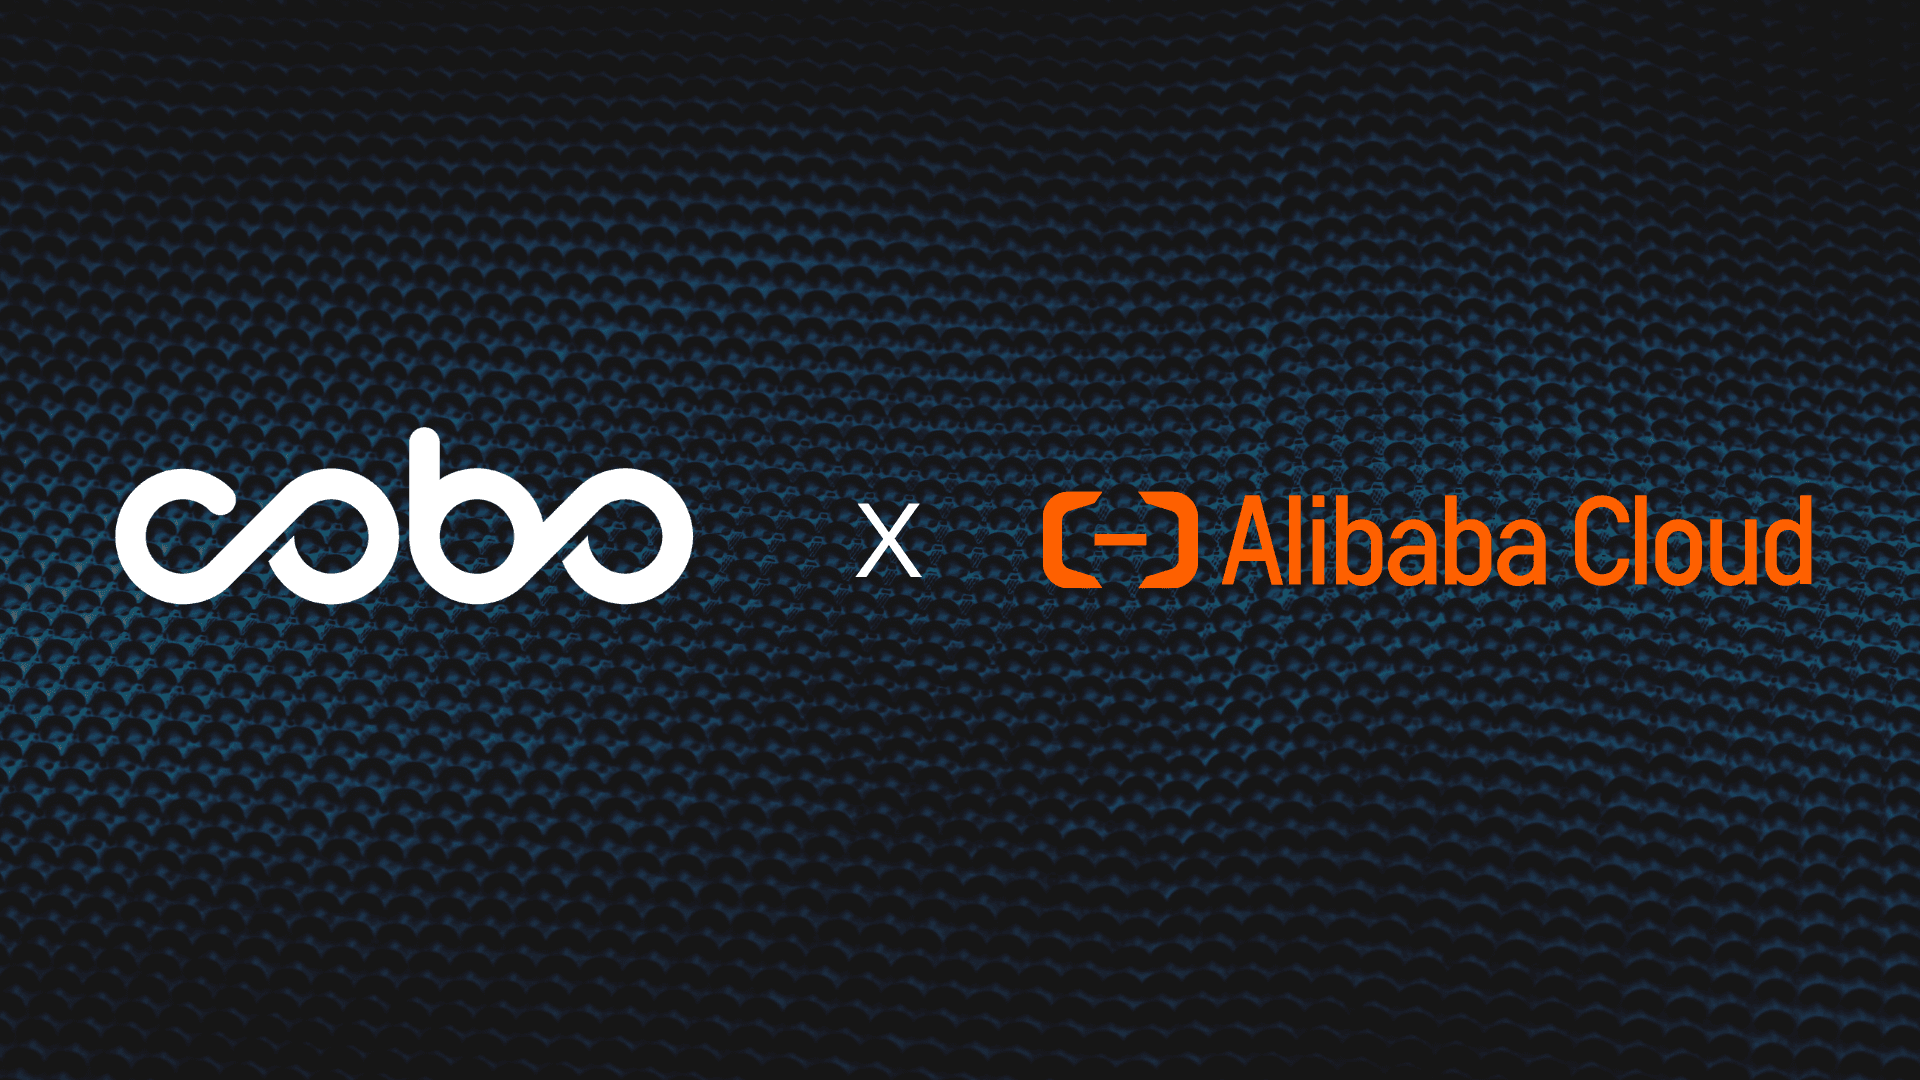 Cobo and Alibaba Cloud Team Up to Bring Enterprise-Grade Wallet Infrastructure to Web3 Organizations and Teams, Including Startups